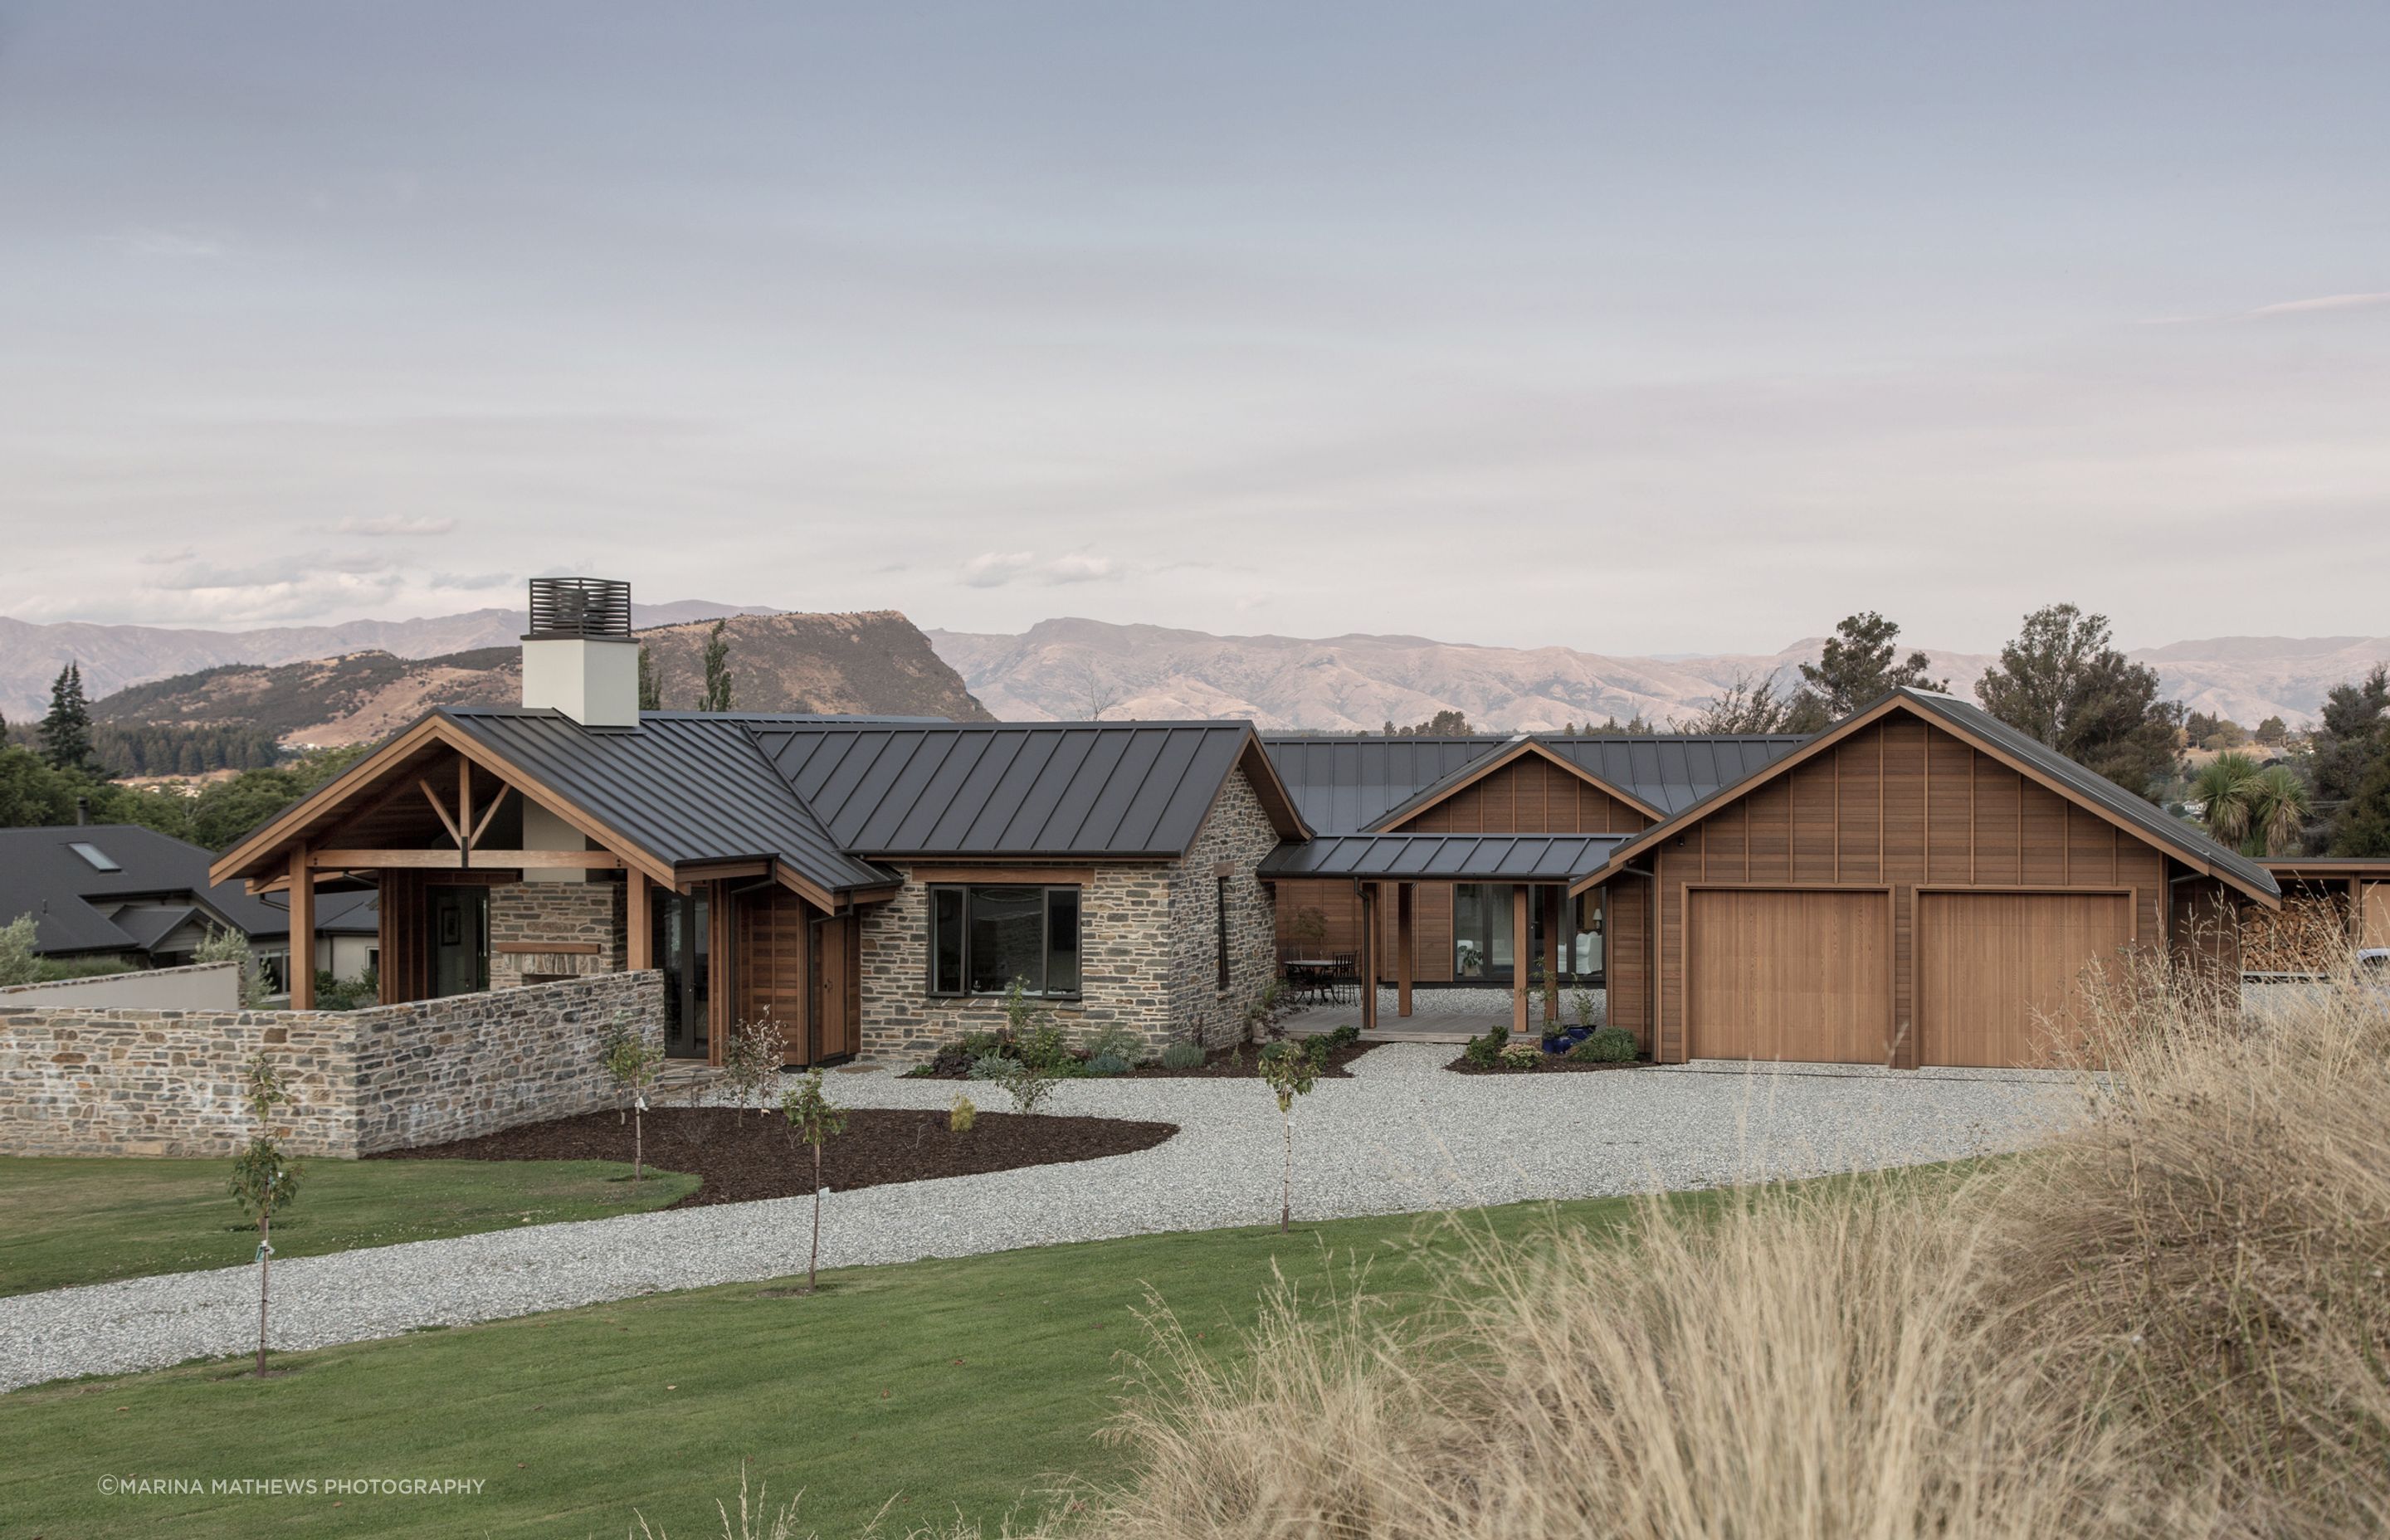 On a generous site on the outskirts of Wanaka, this house comprises three connected pavilions—a living pavilion, a sleeping pavilion and a separate garage pavilion.